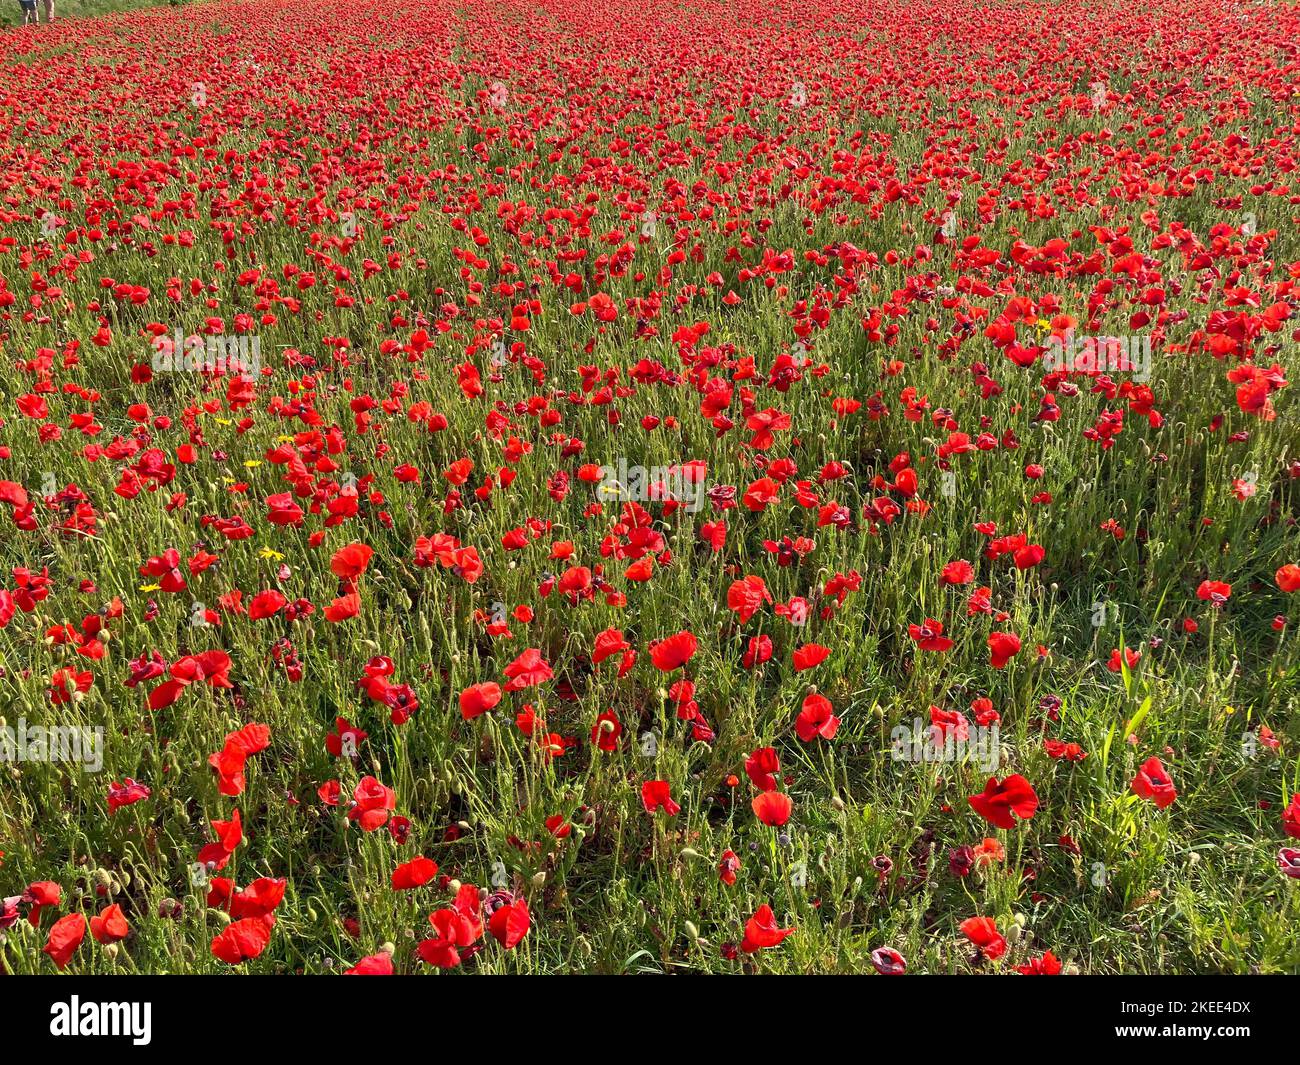 A scenic view of a field of red poppy flowers in a rural area in daylight Stock Photo